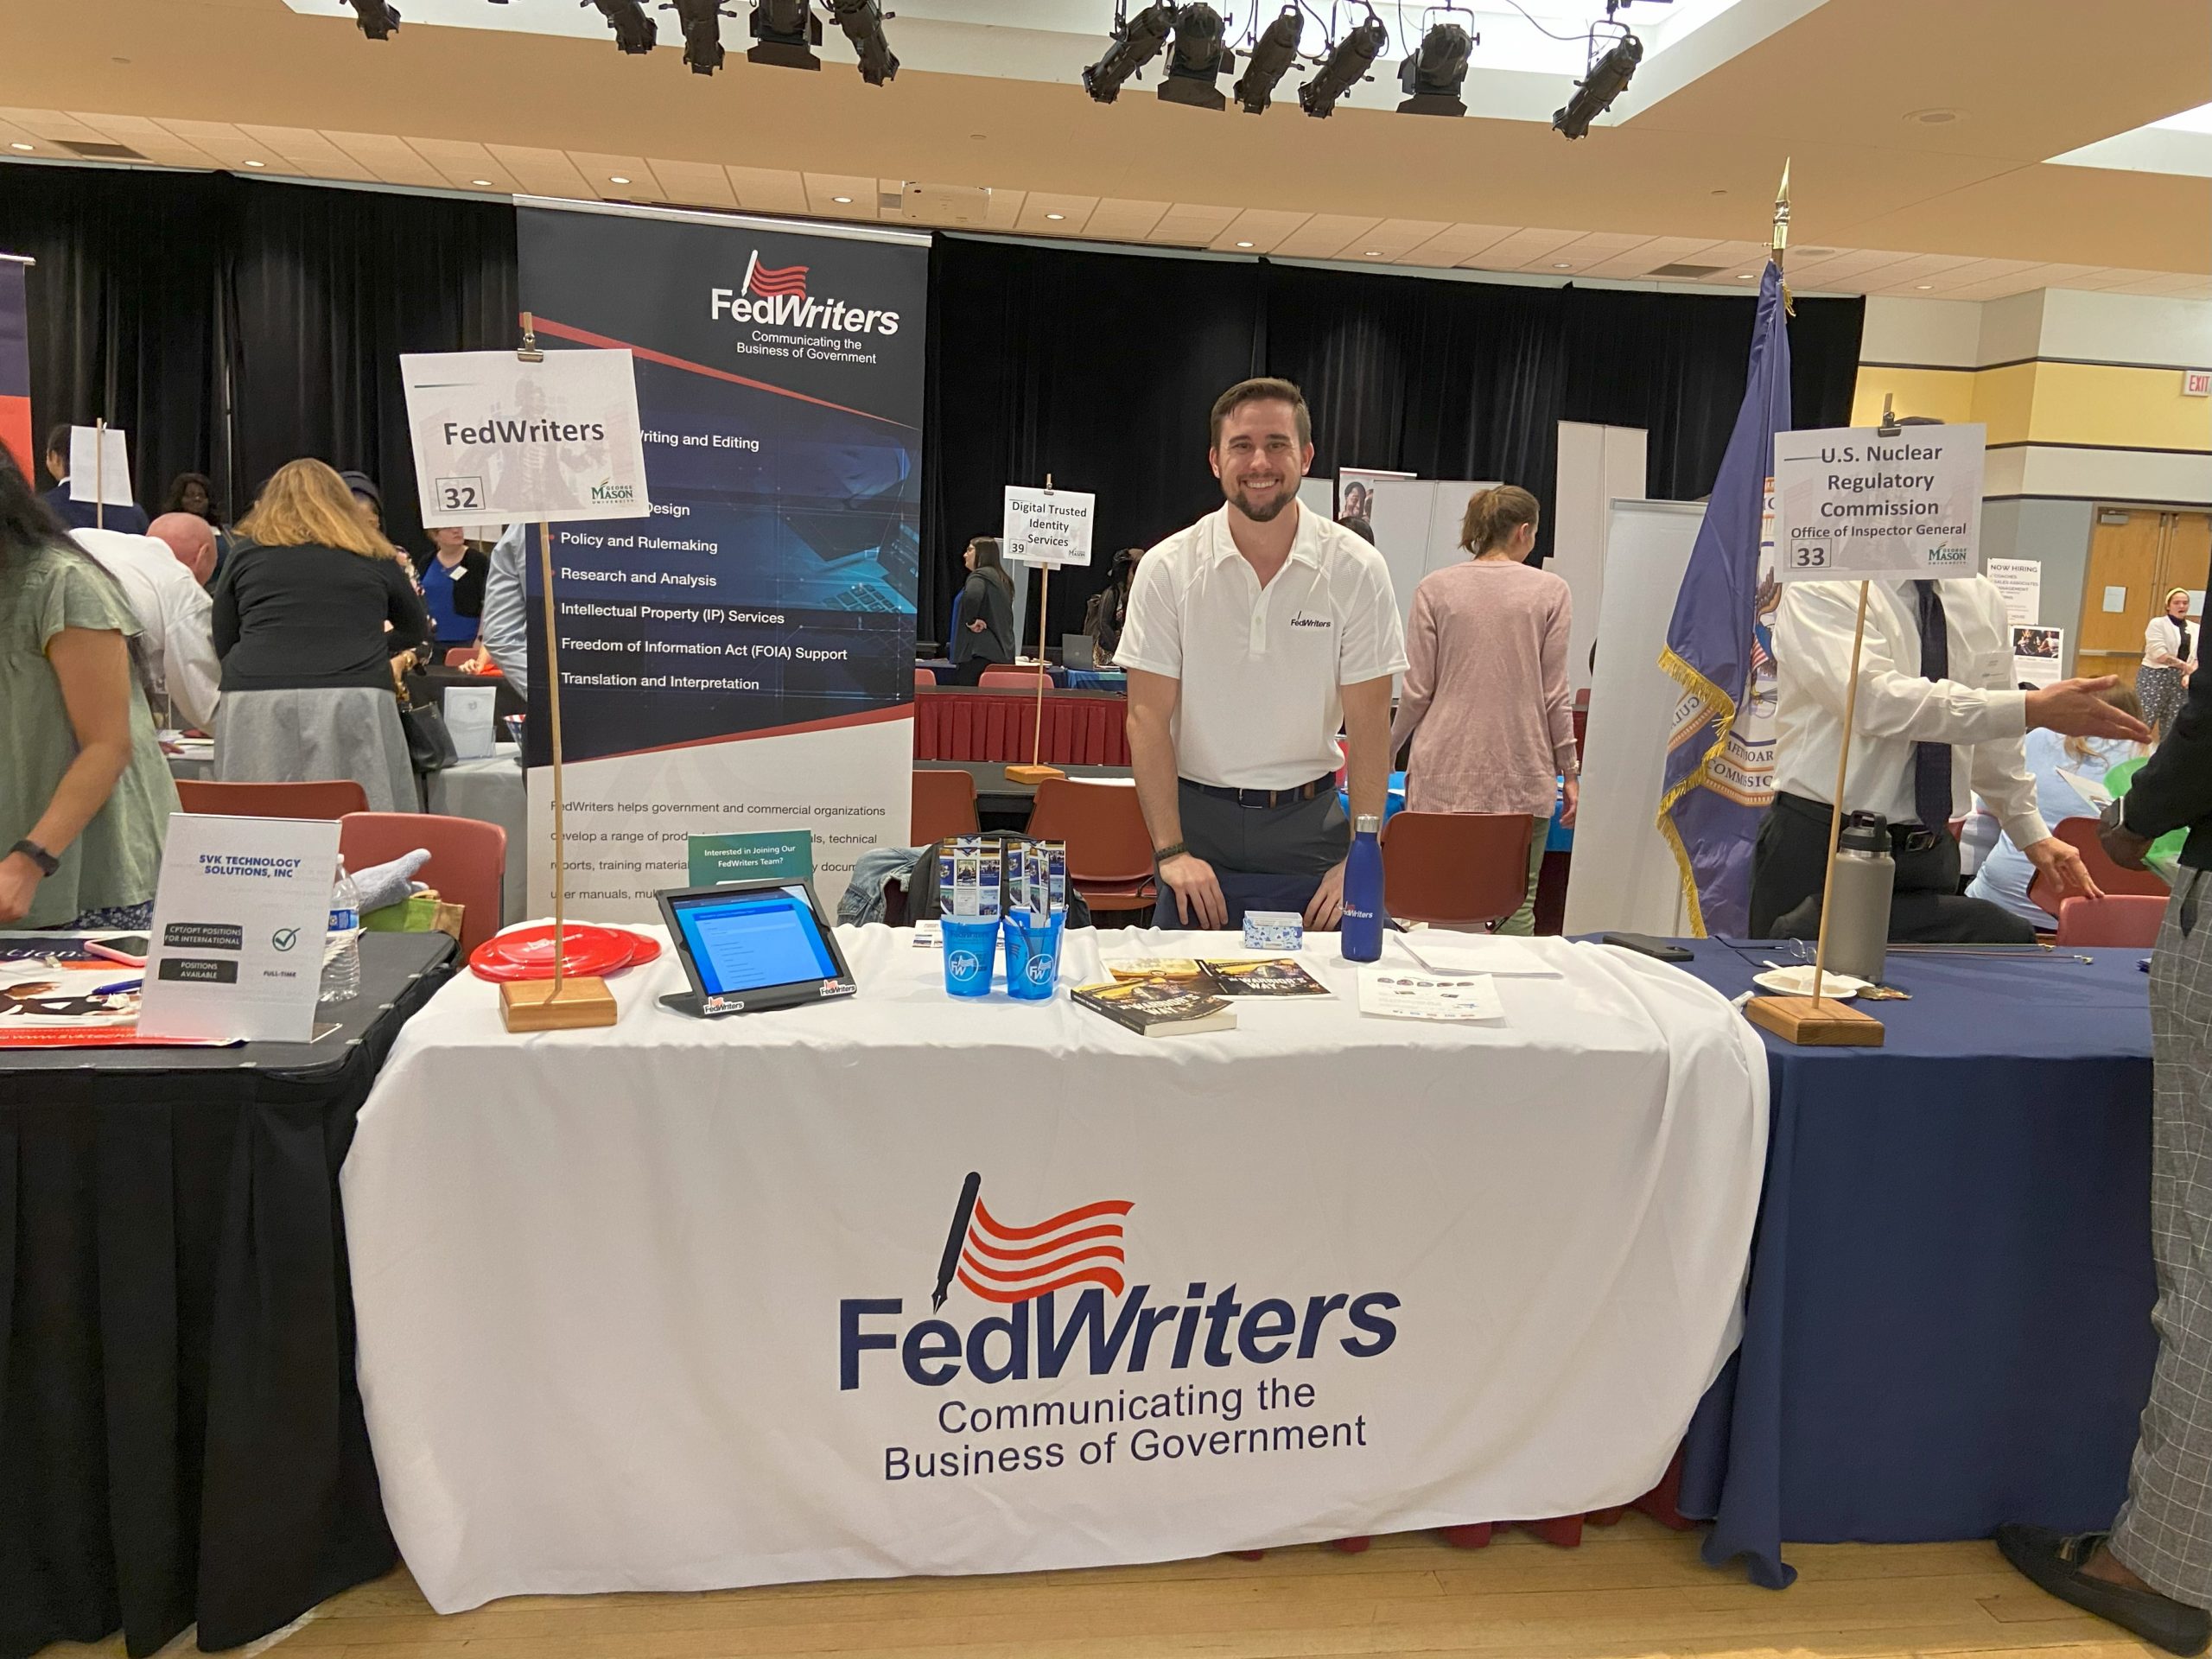 FedWriters' booth at a recruiting fair. Table covered in a white cloth with the FedWriters logo has cups and samples of FedWriters' publications.